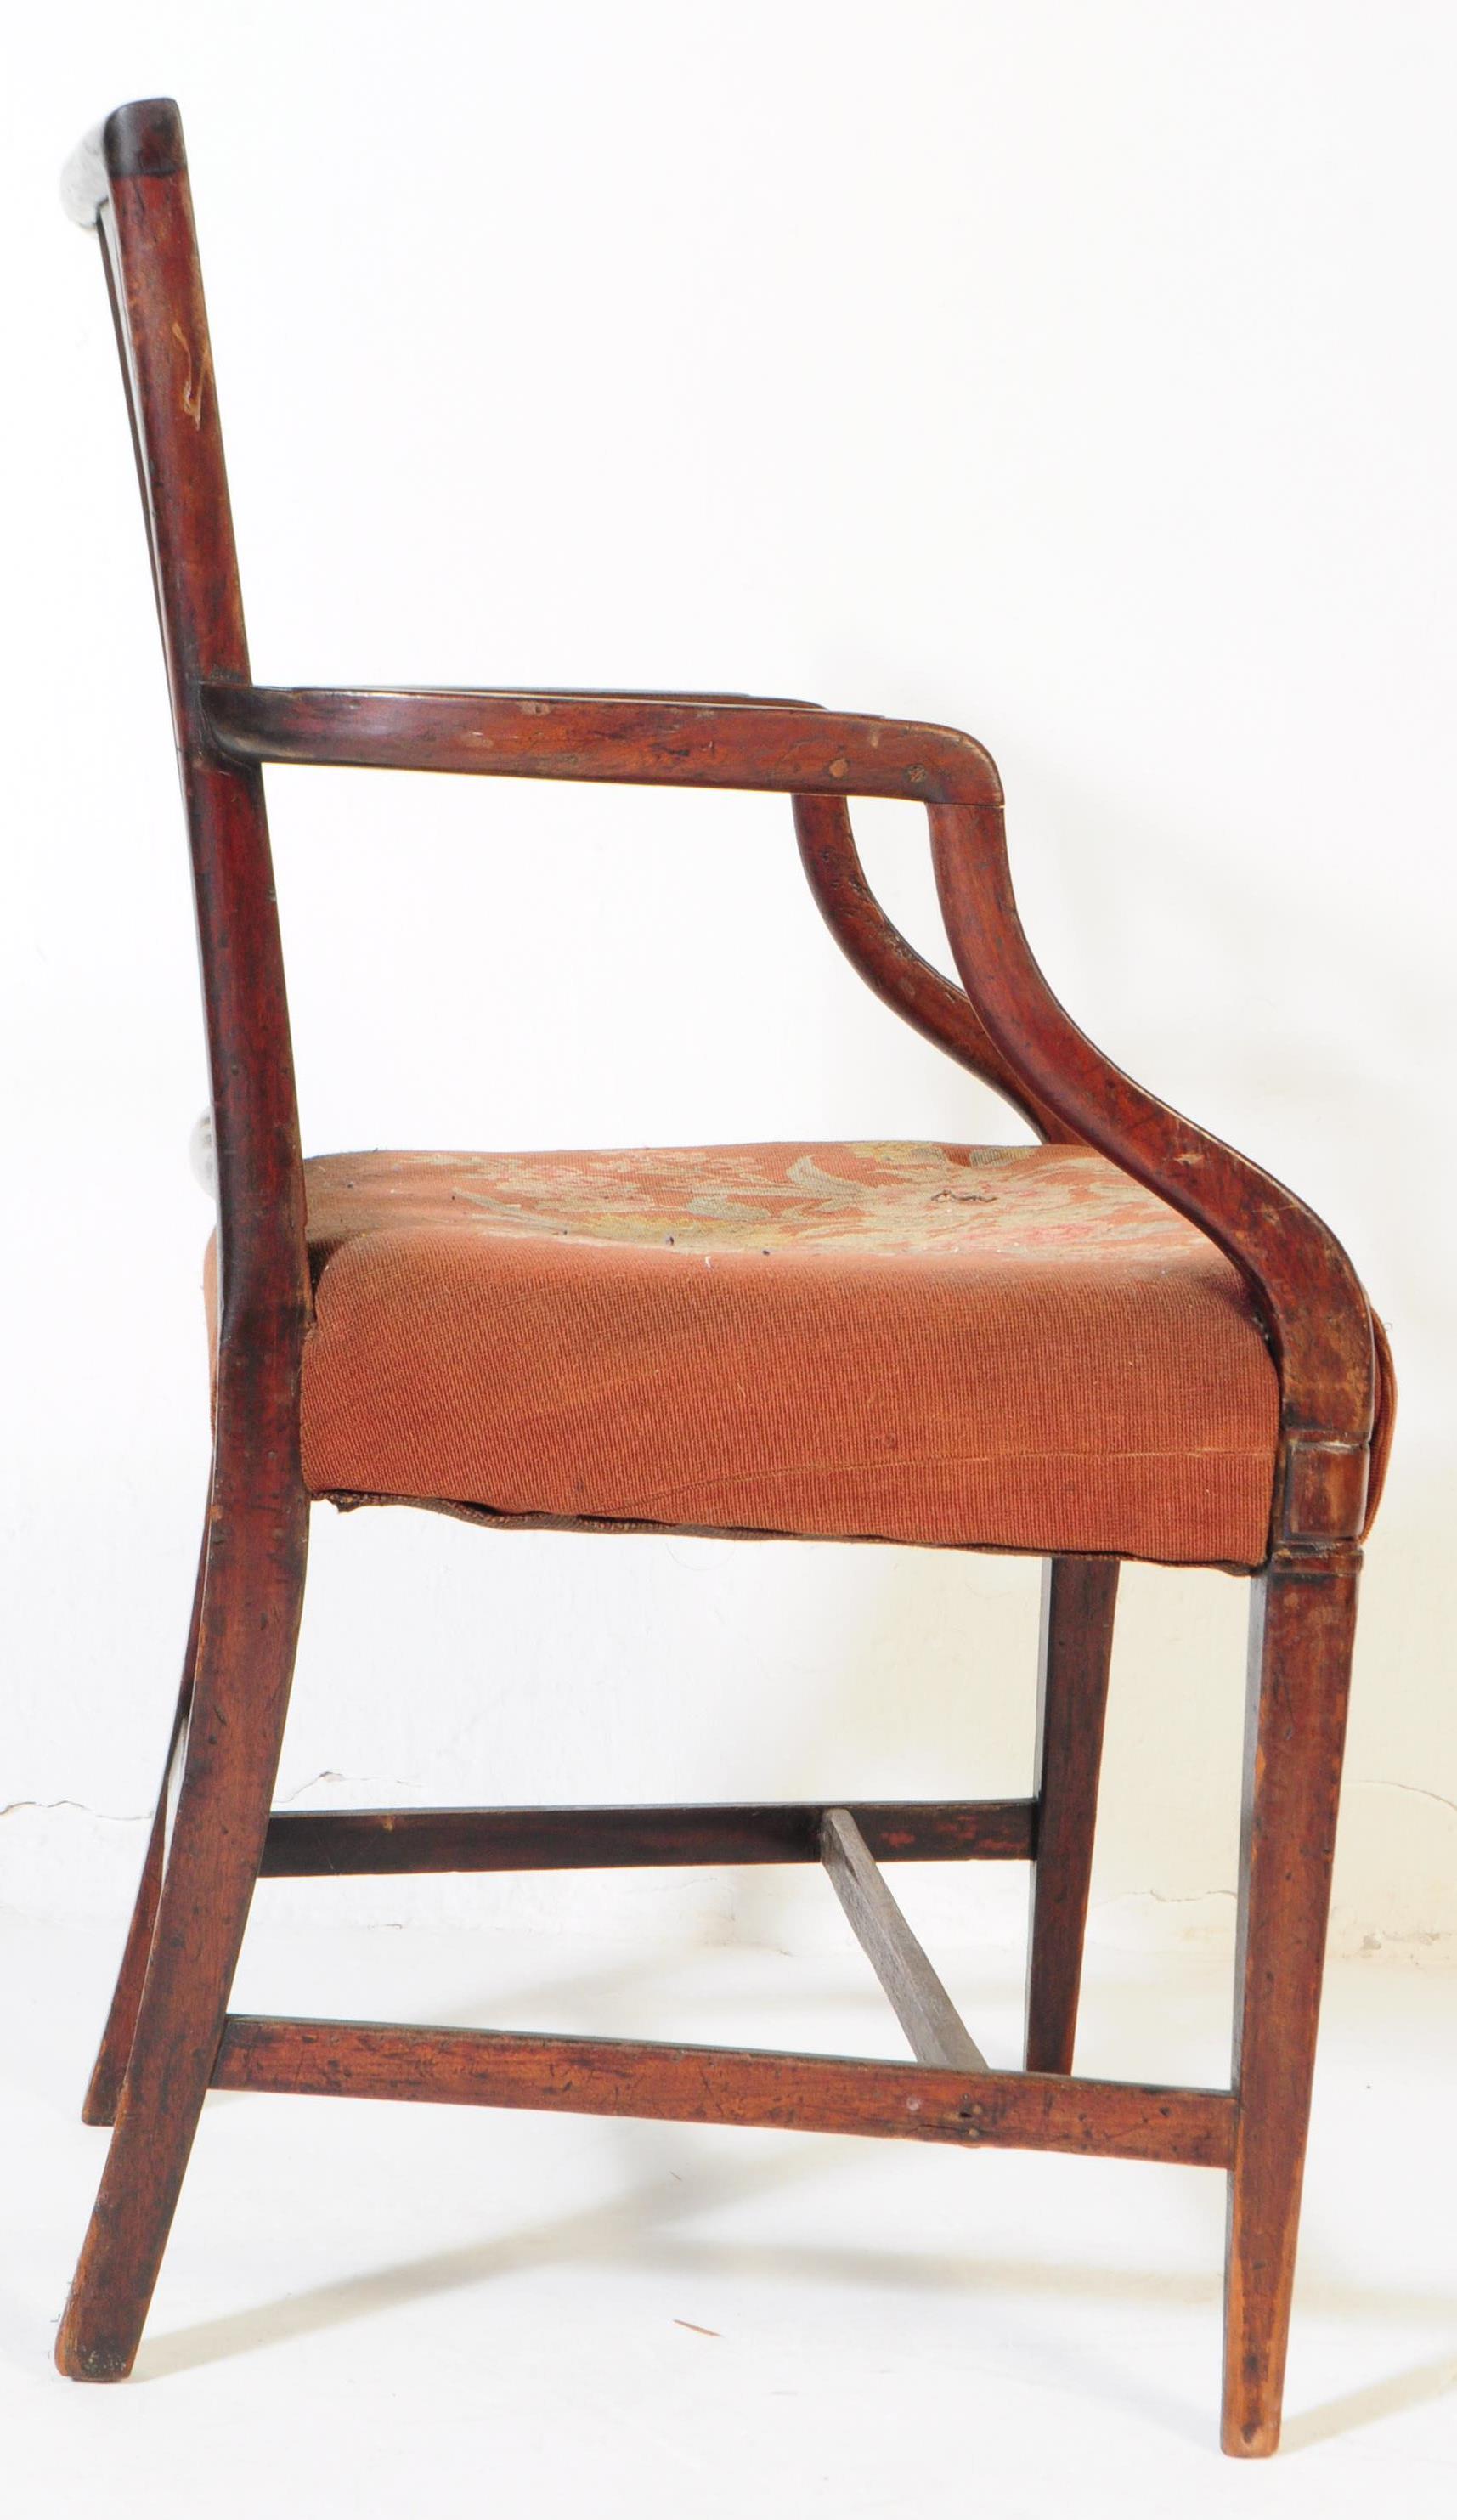 TWO GEORGE III 19TH CENTURY ROSEWOOD DINING CHAIRS - Image 6 of 6